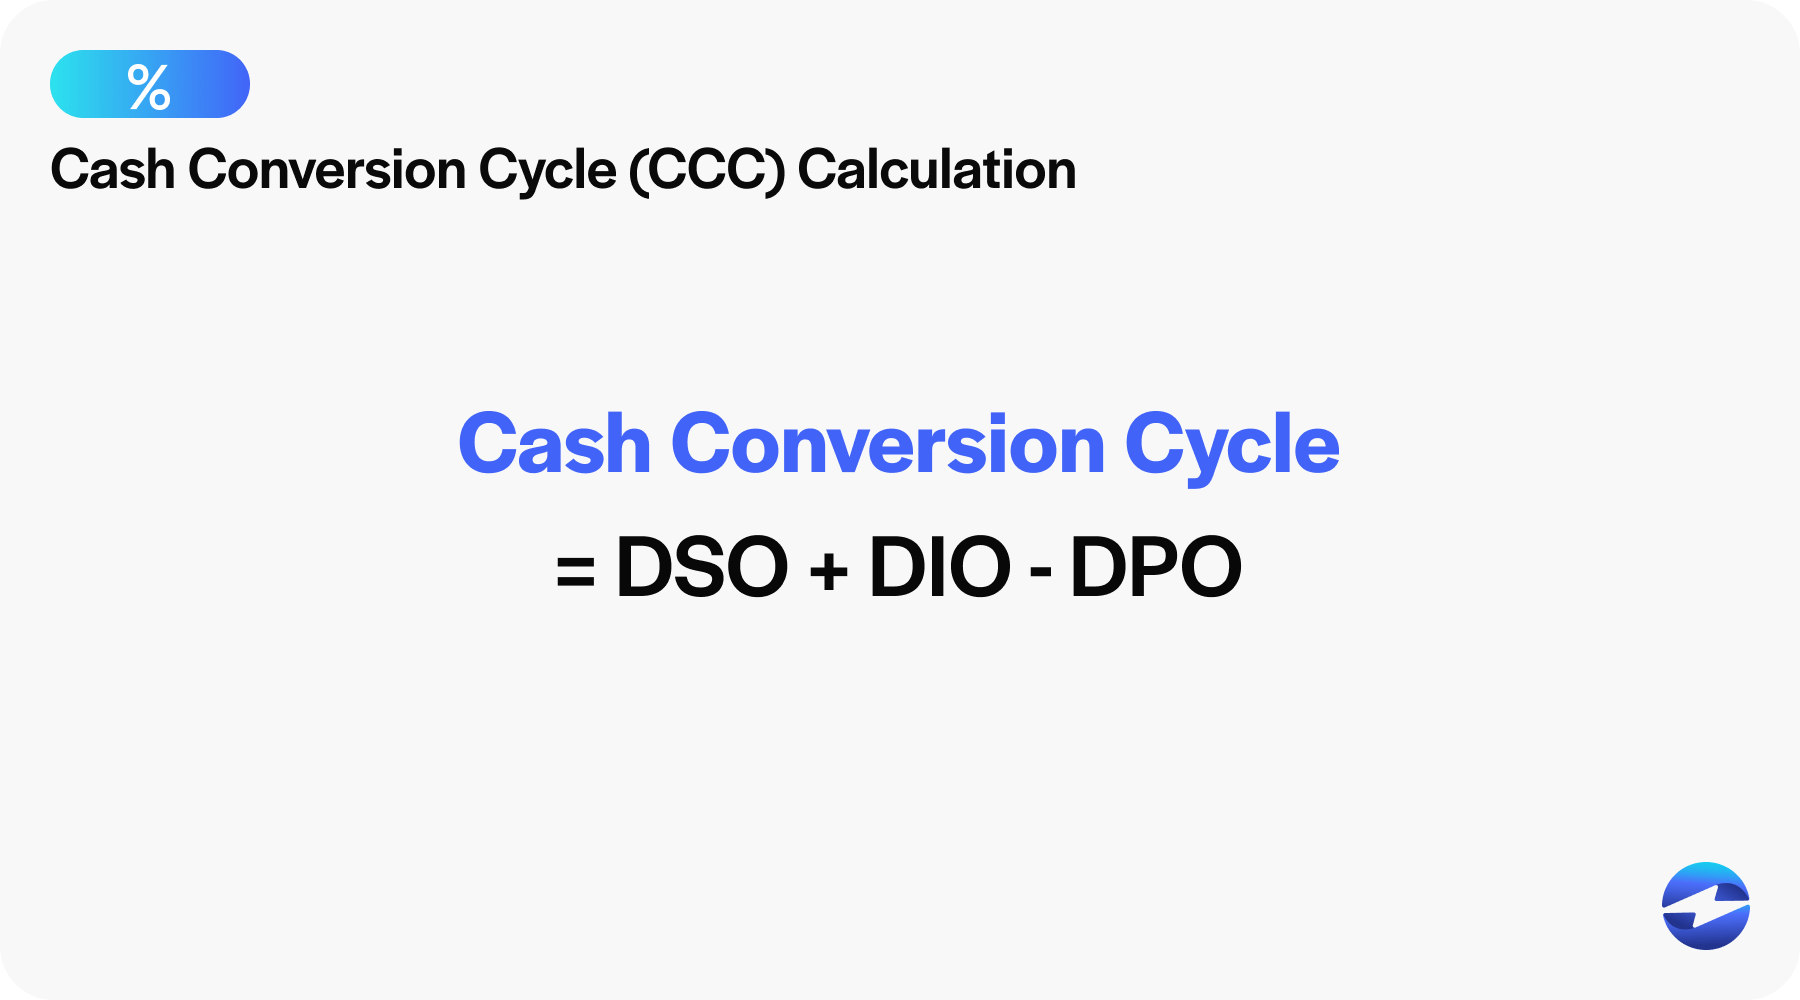 the cash conversion cycle is computed as: